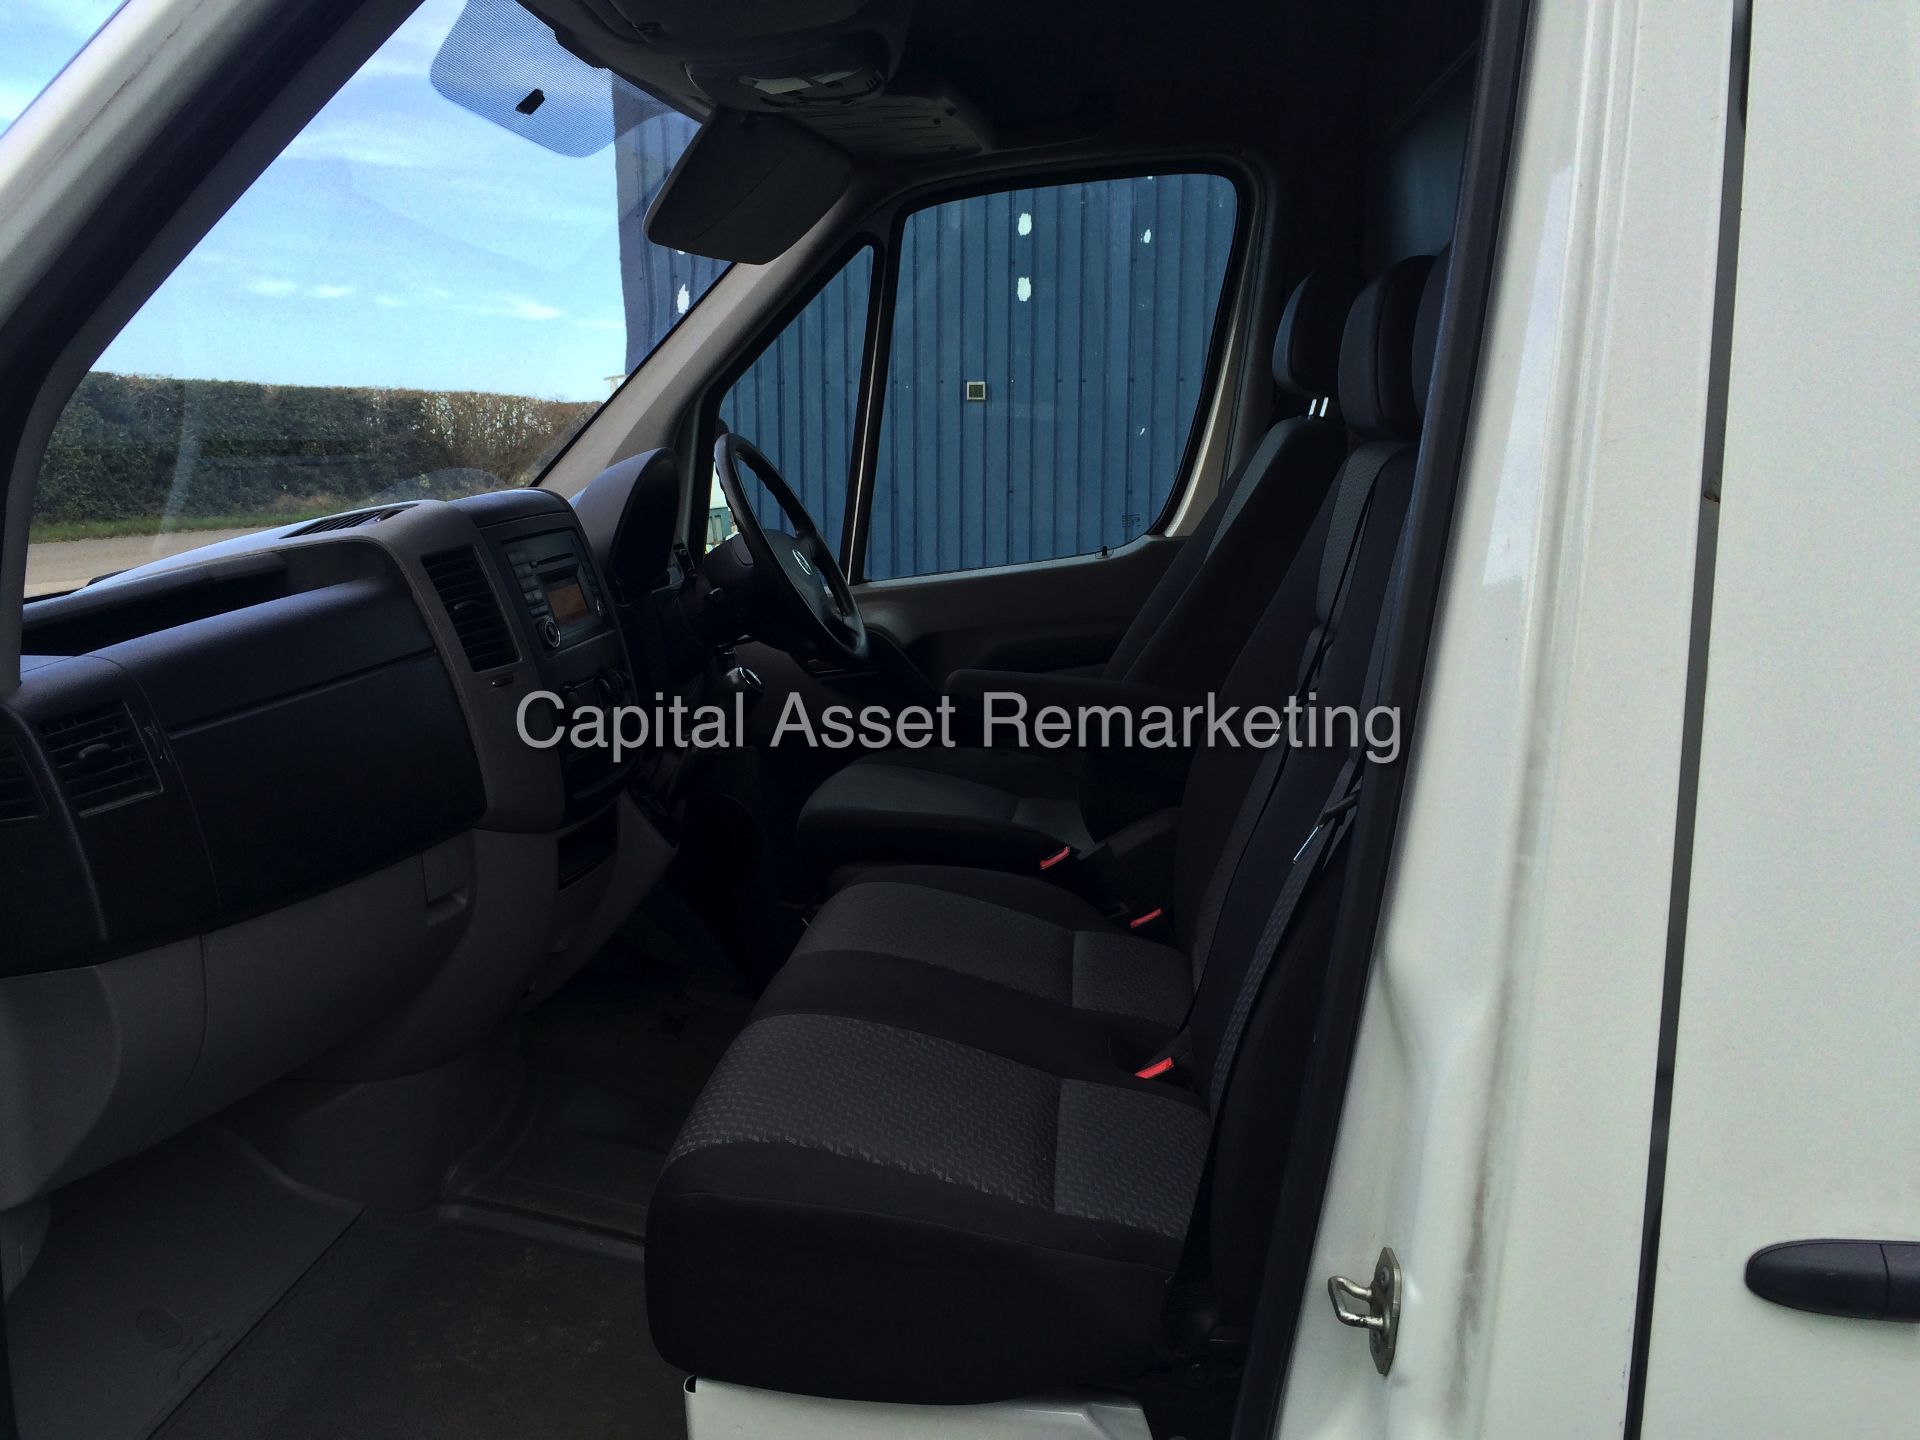 VOLKSWAGEN CRAFTER 2.0Ltr TDI CR35 LWB (2014 MODEL) NEW SHAPE - CRUISE CONTROL - 1 OWNER FROM NEW !! - Image 13 of 19